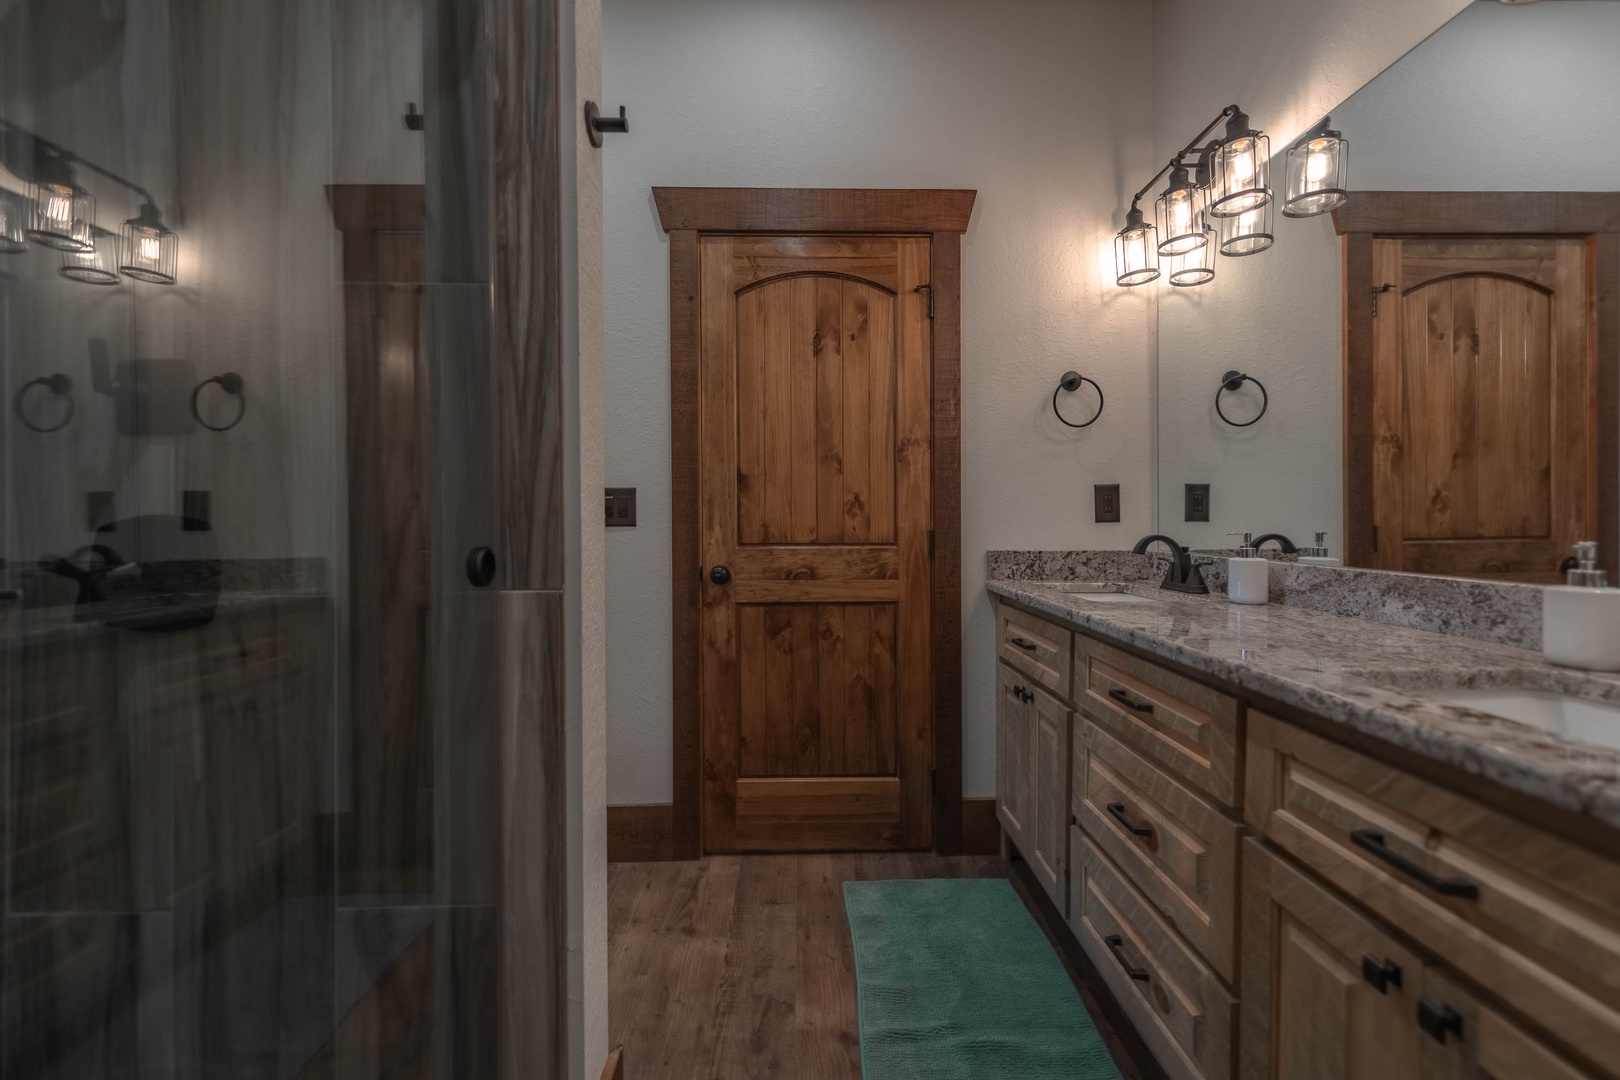 Southern Star- Full private bathroom with vanity sink and walk in shower